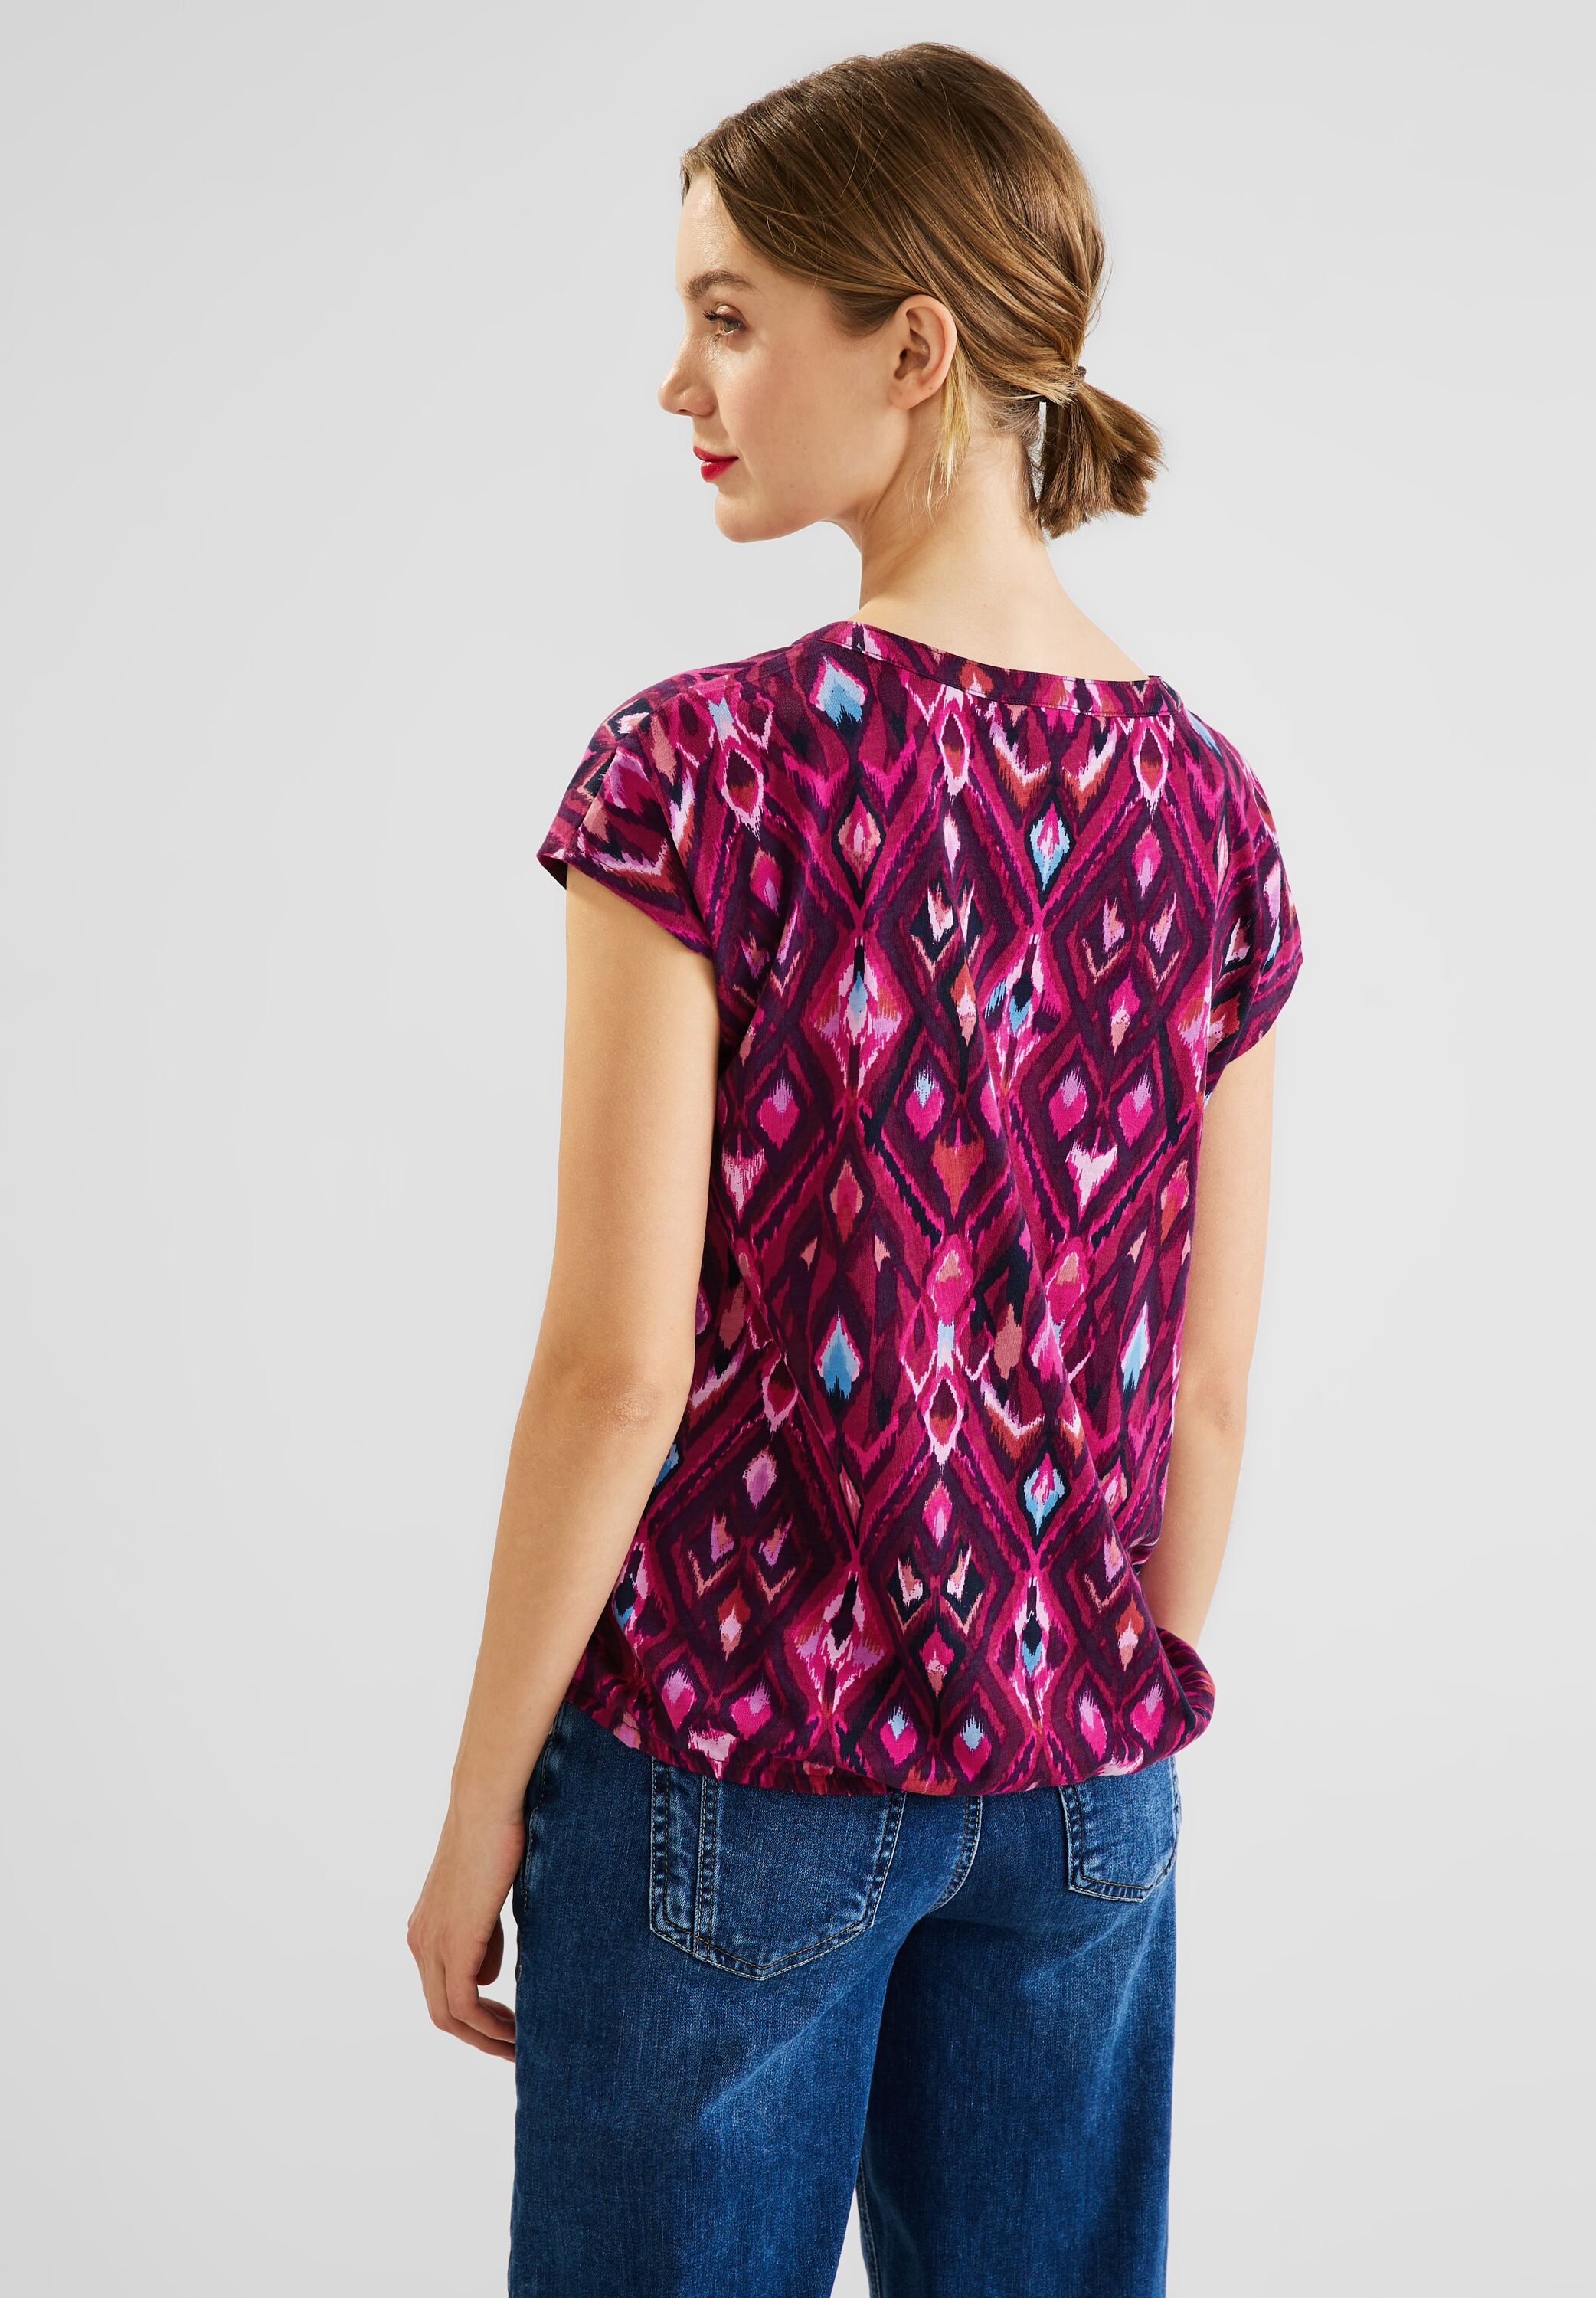 Street One T-Shirt in Tamed Berry im SALE reduziert A319605-34886 - CONCEPT  Mode